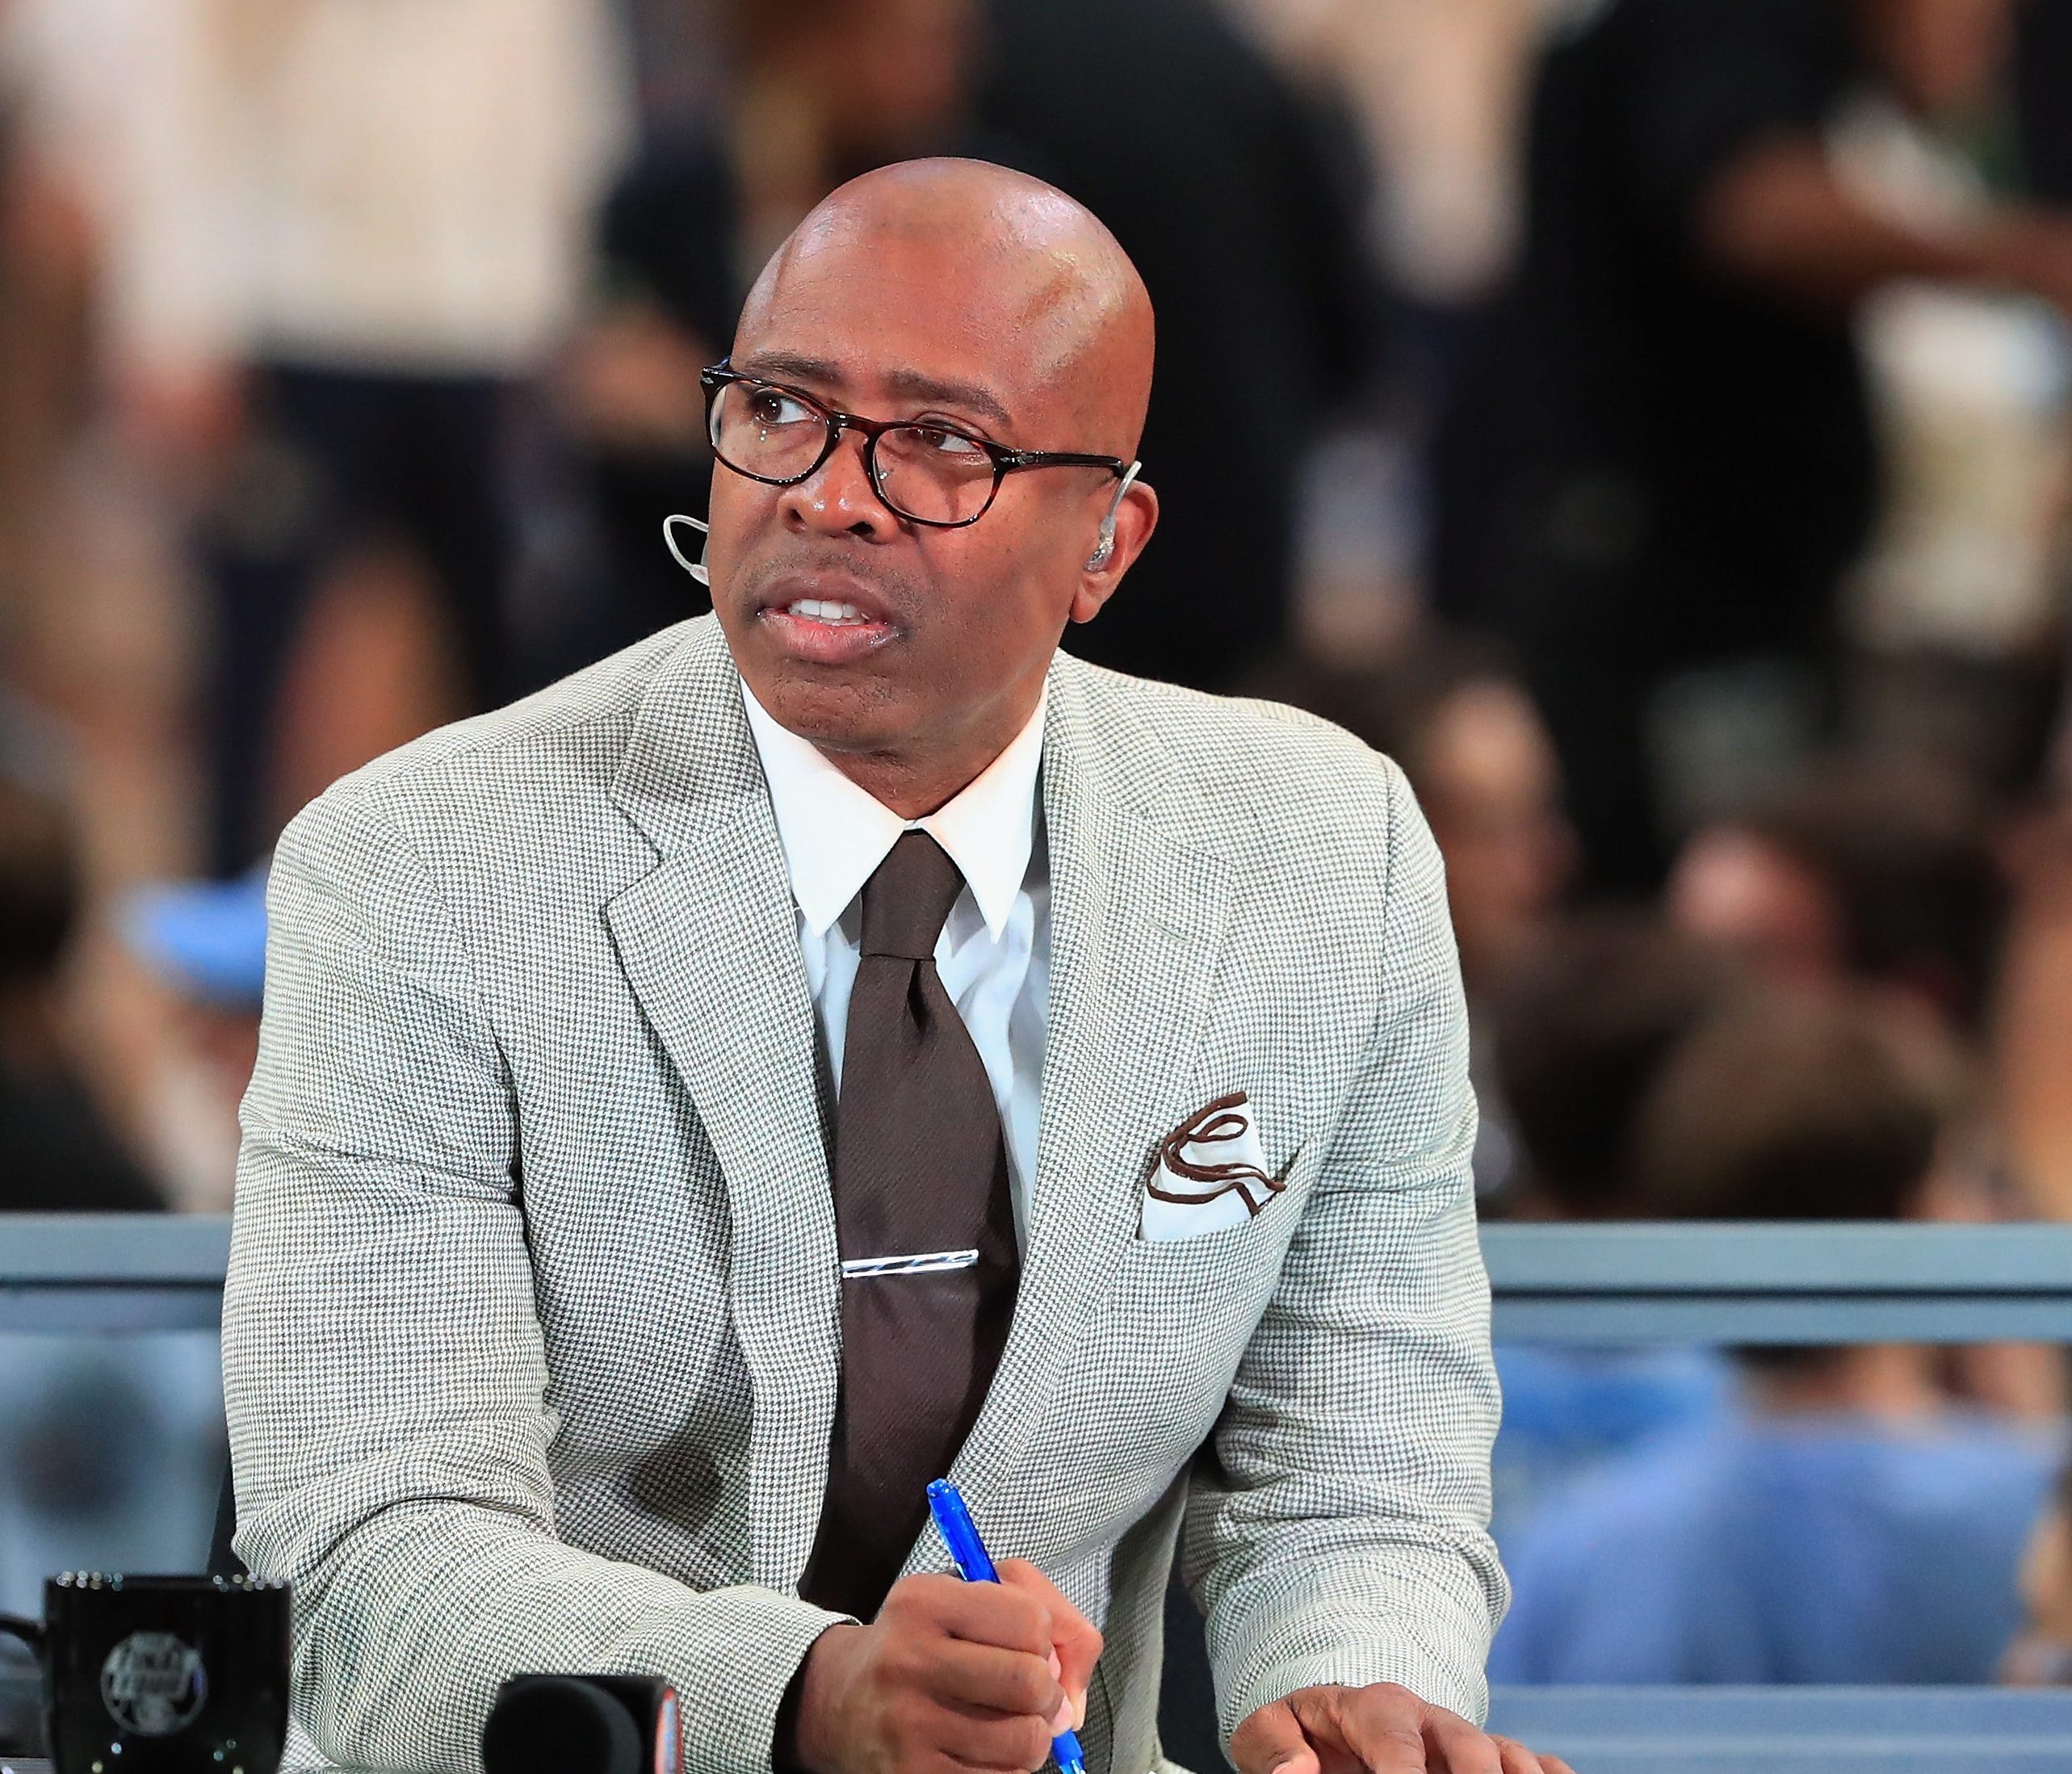 TV personality Kenny Smith looks on before the game between the North Carolina Tar Heels and the Gonzaga Bulldogs during the 2017 NCAA Men's Final Four National Championship game at University of Phoenix Stadium on April 3, 2017 in Glendale, Arizona.